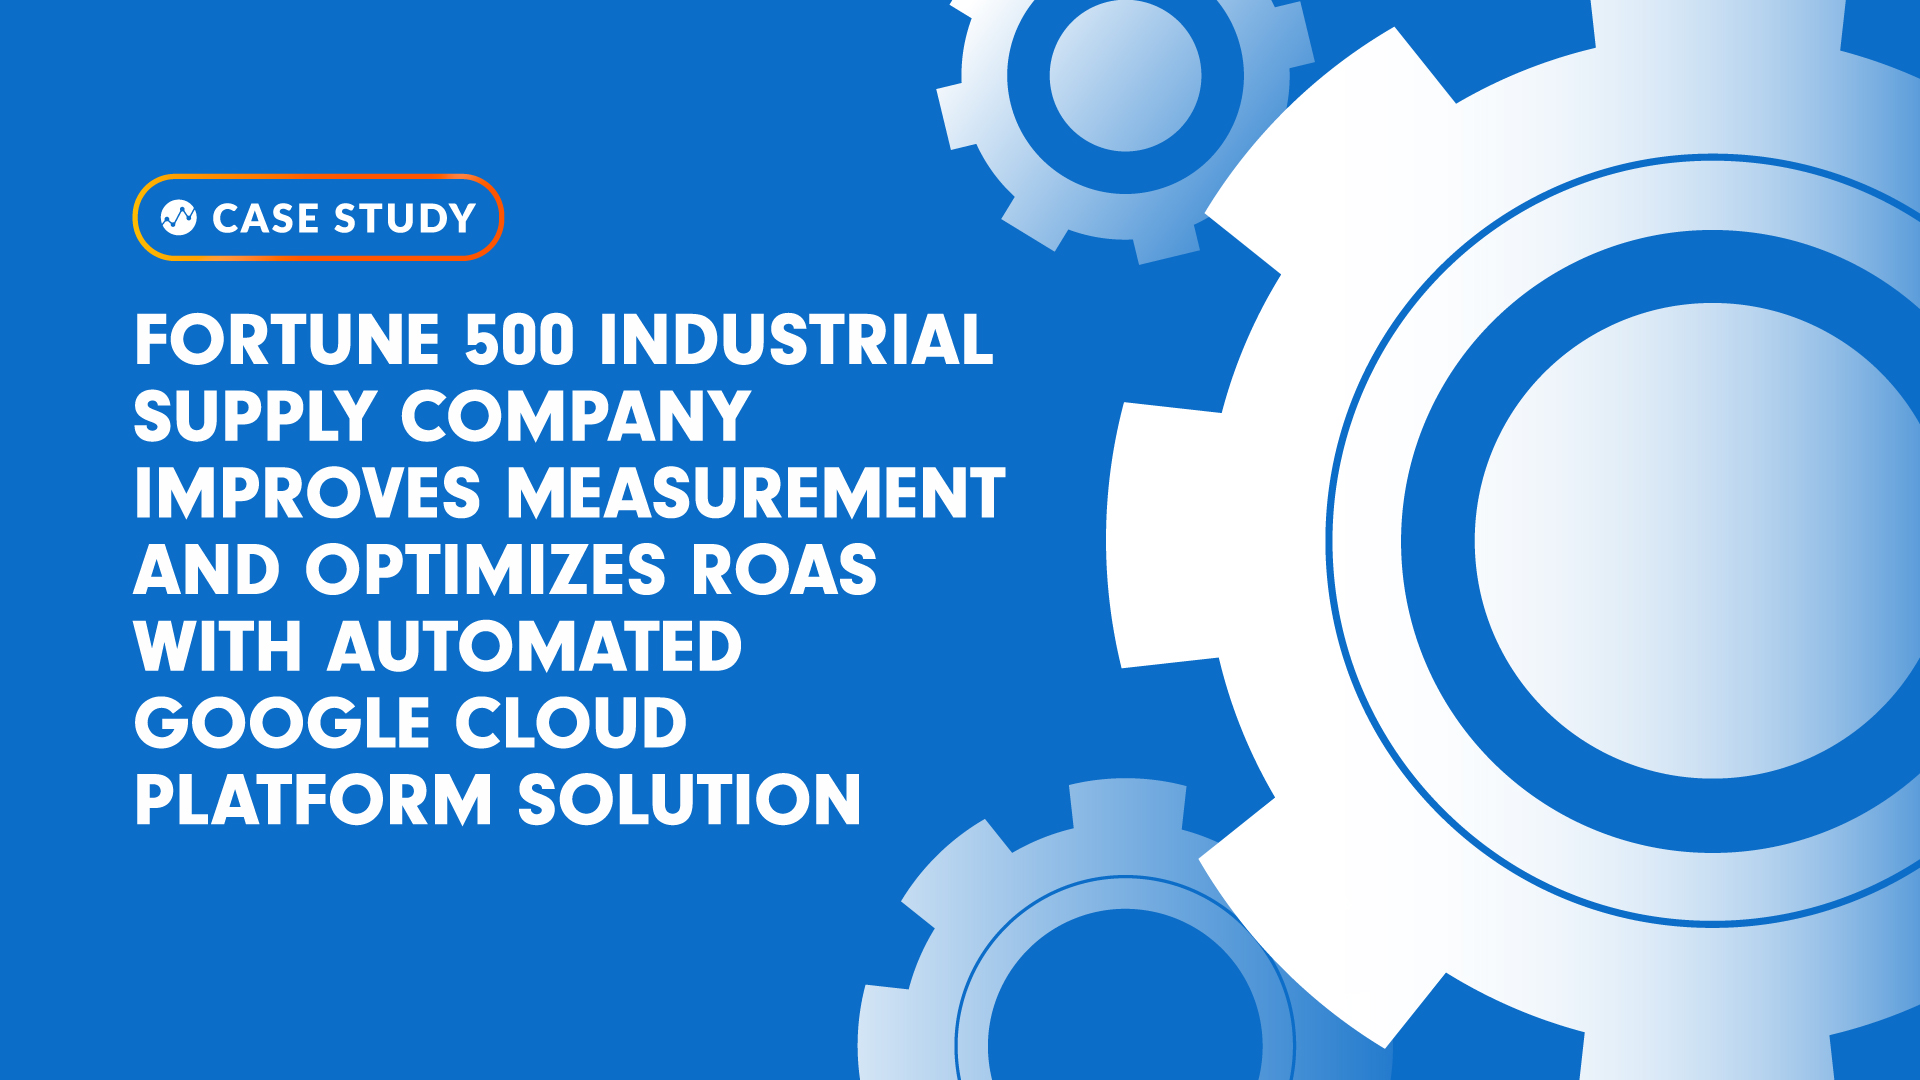 Fortune 500 Industrial Supply Company Improves Measurement and Optimizes ROAS with Automated Google Cloud Platform Solution